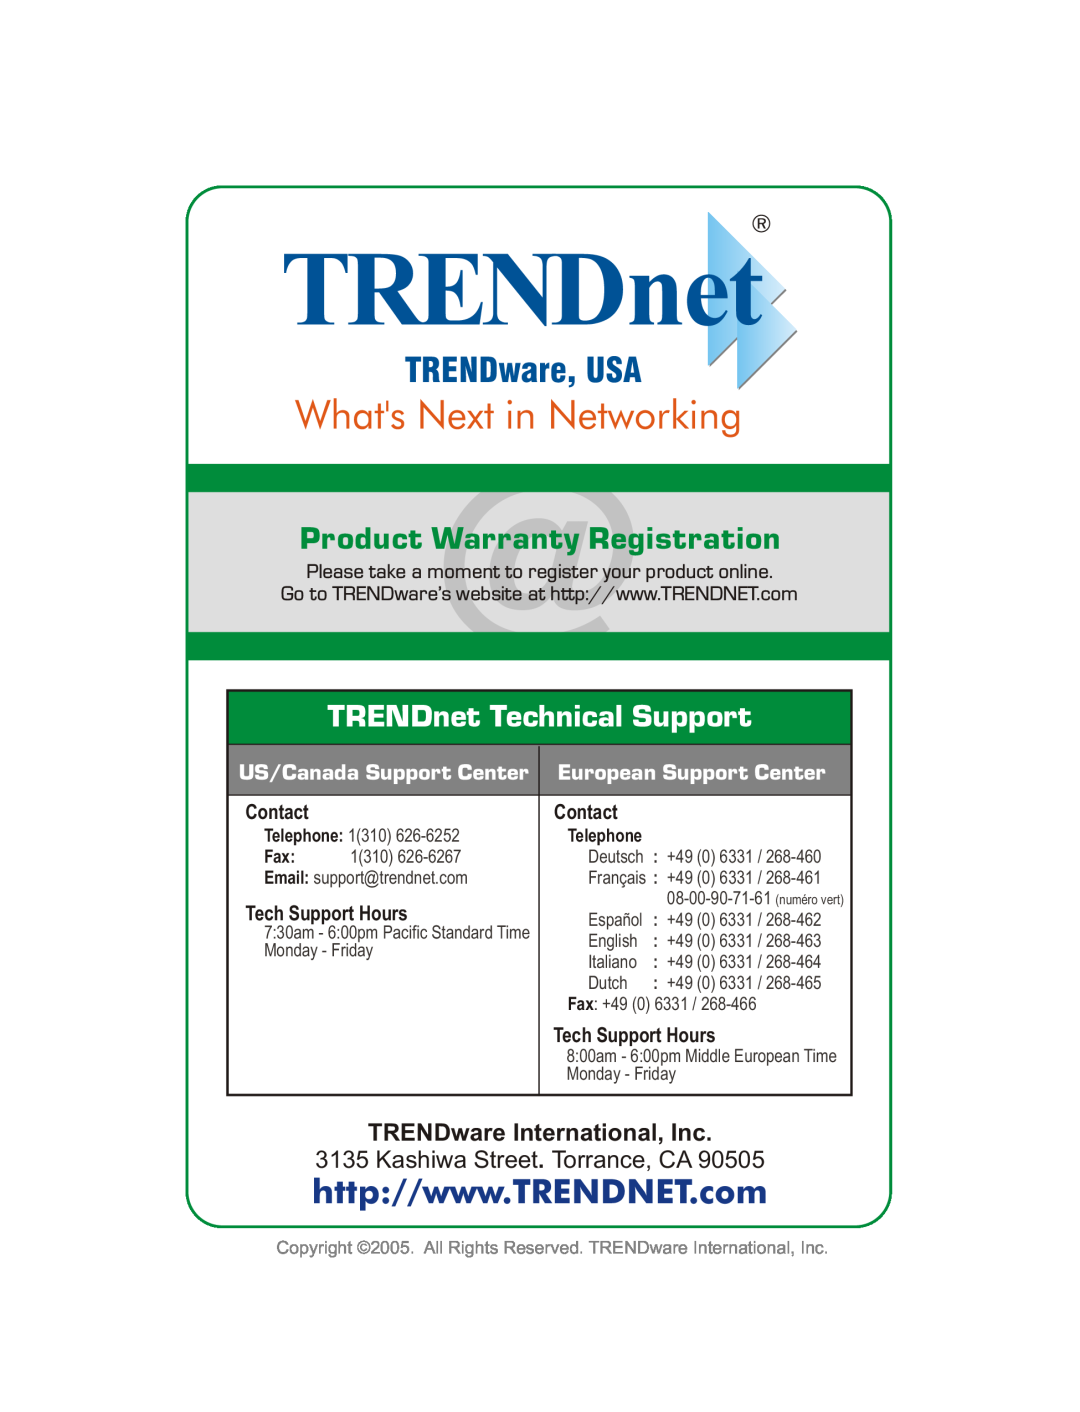 TRENDnet Wireless Access Point manual US/Canada Support Center, European Support Center, TRENDnet, Whats Next in Networking 